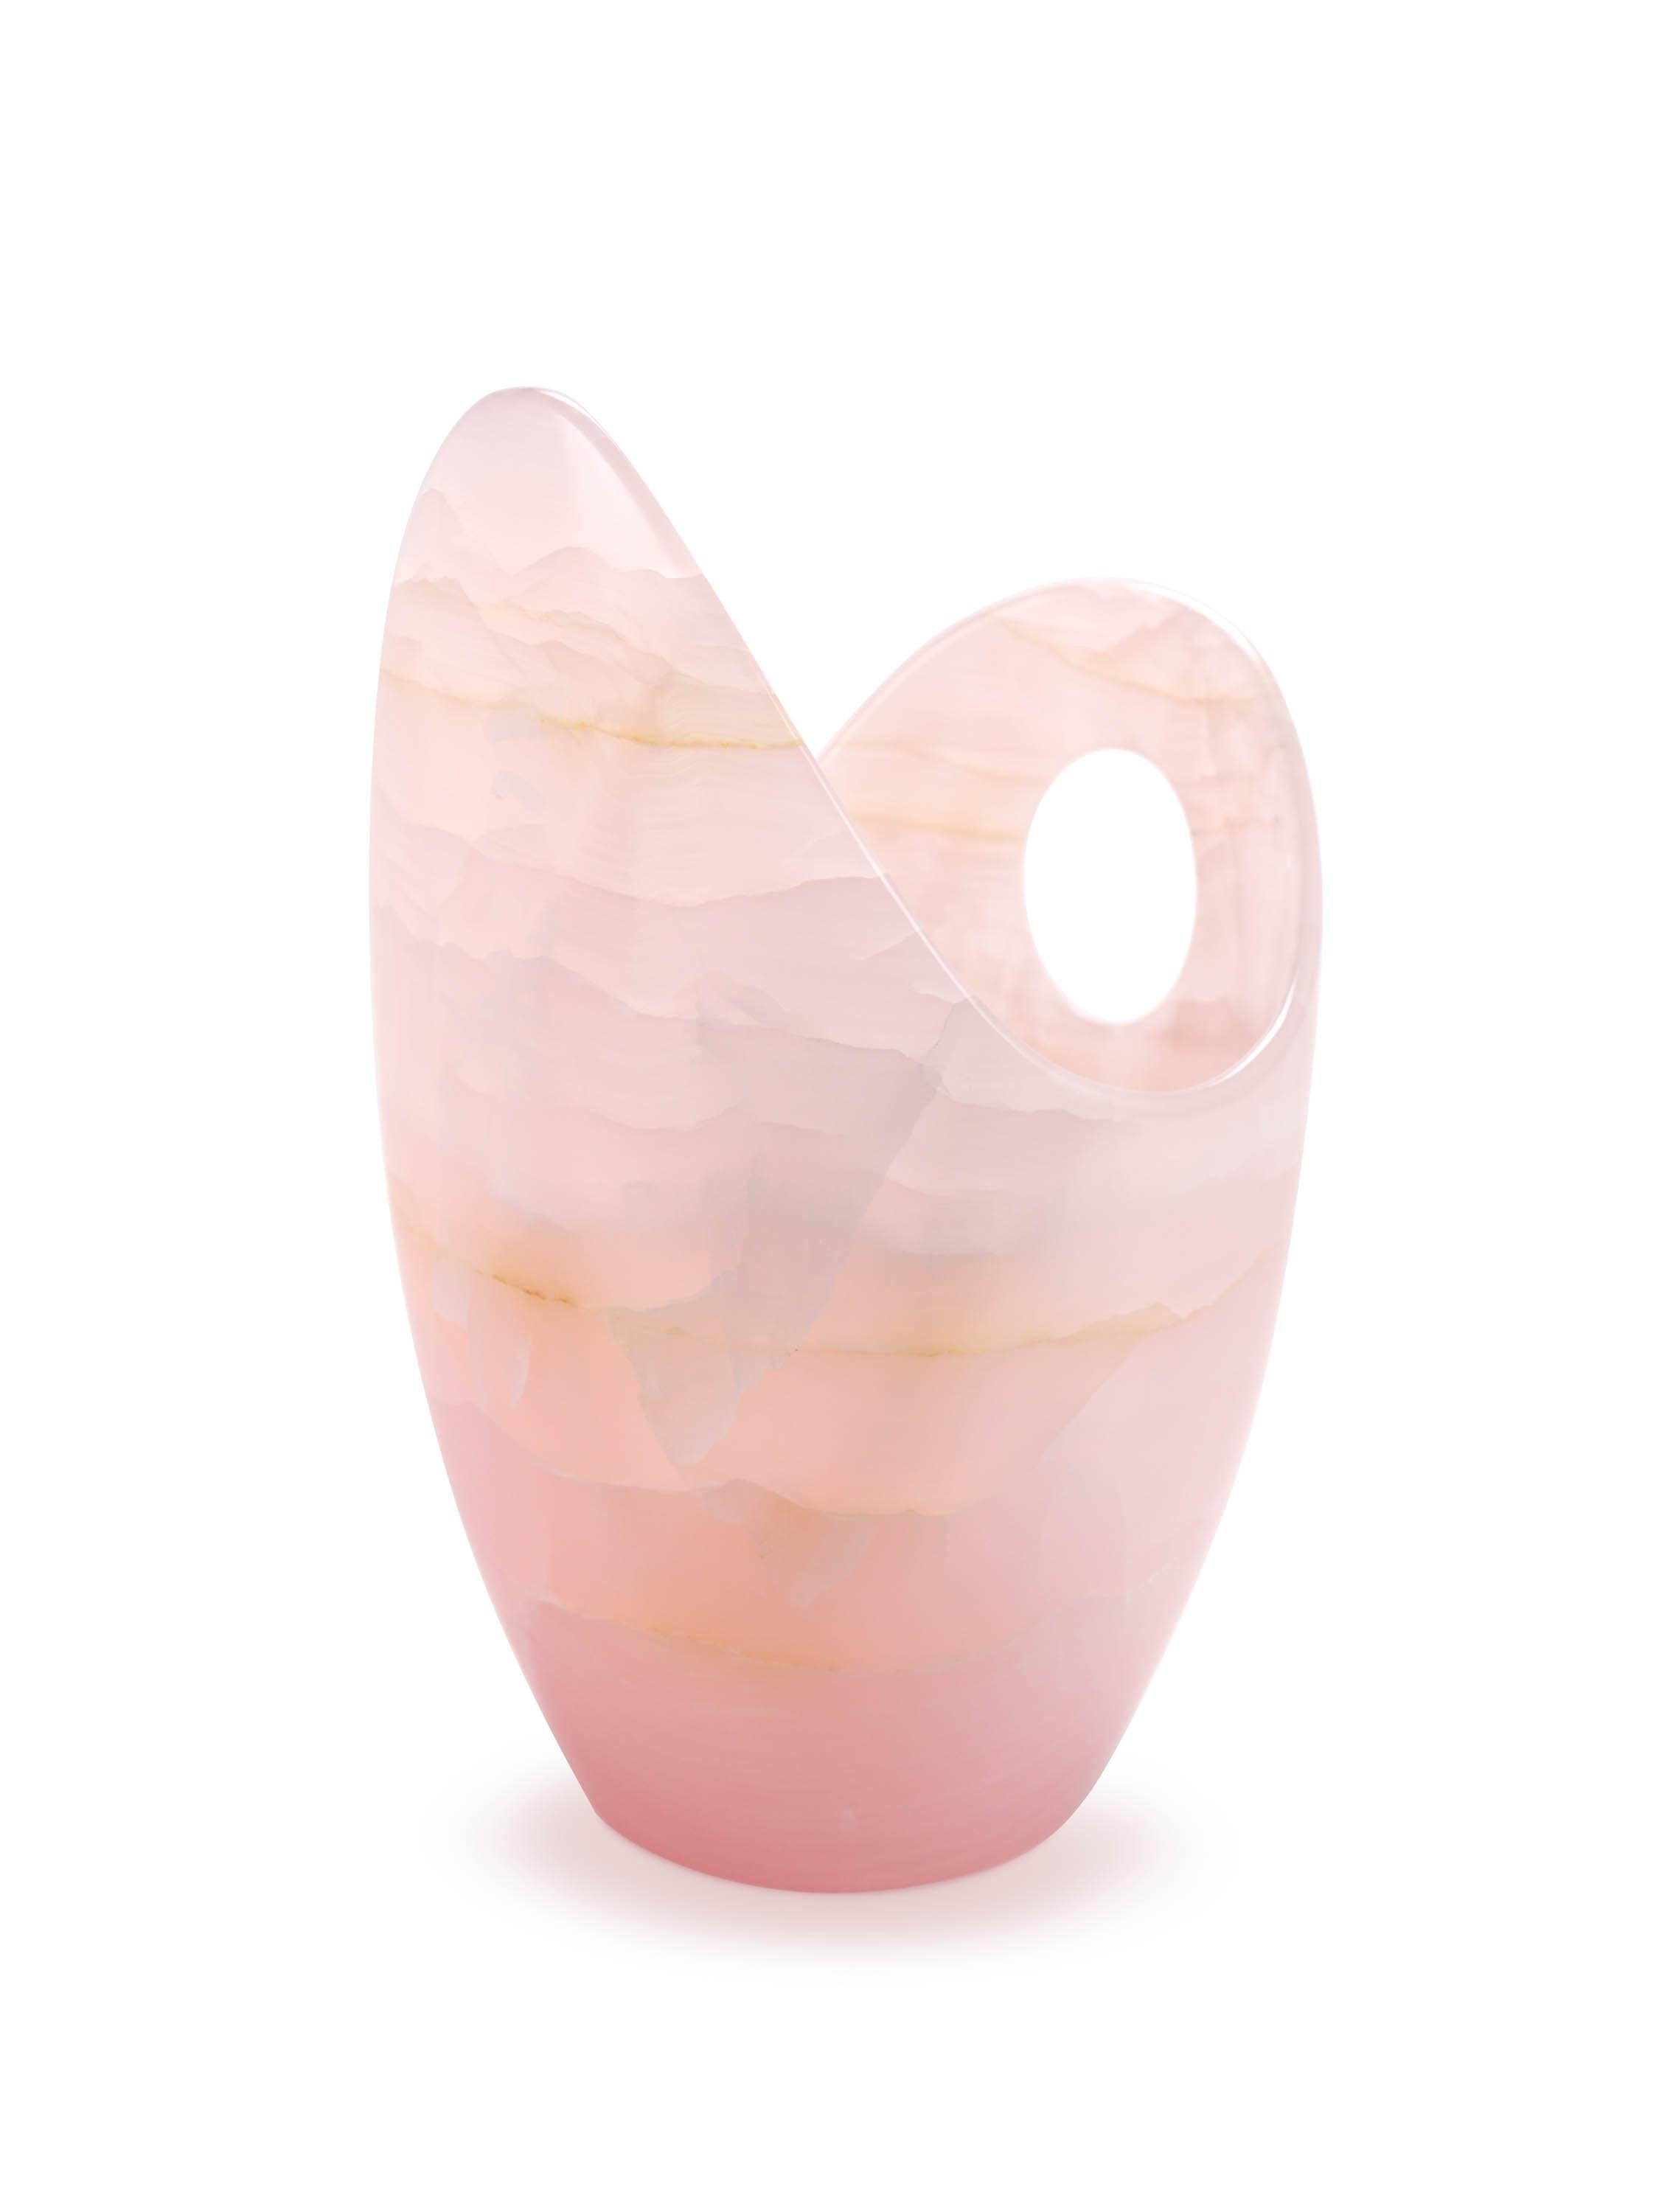 Champagne Bucket Wine Cooler Vase Sculpture Pink Onyx Marble Collectible Design For Sale 2